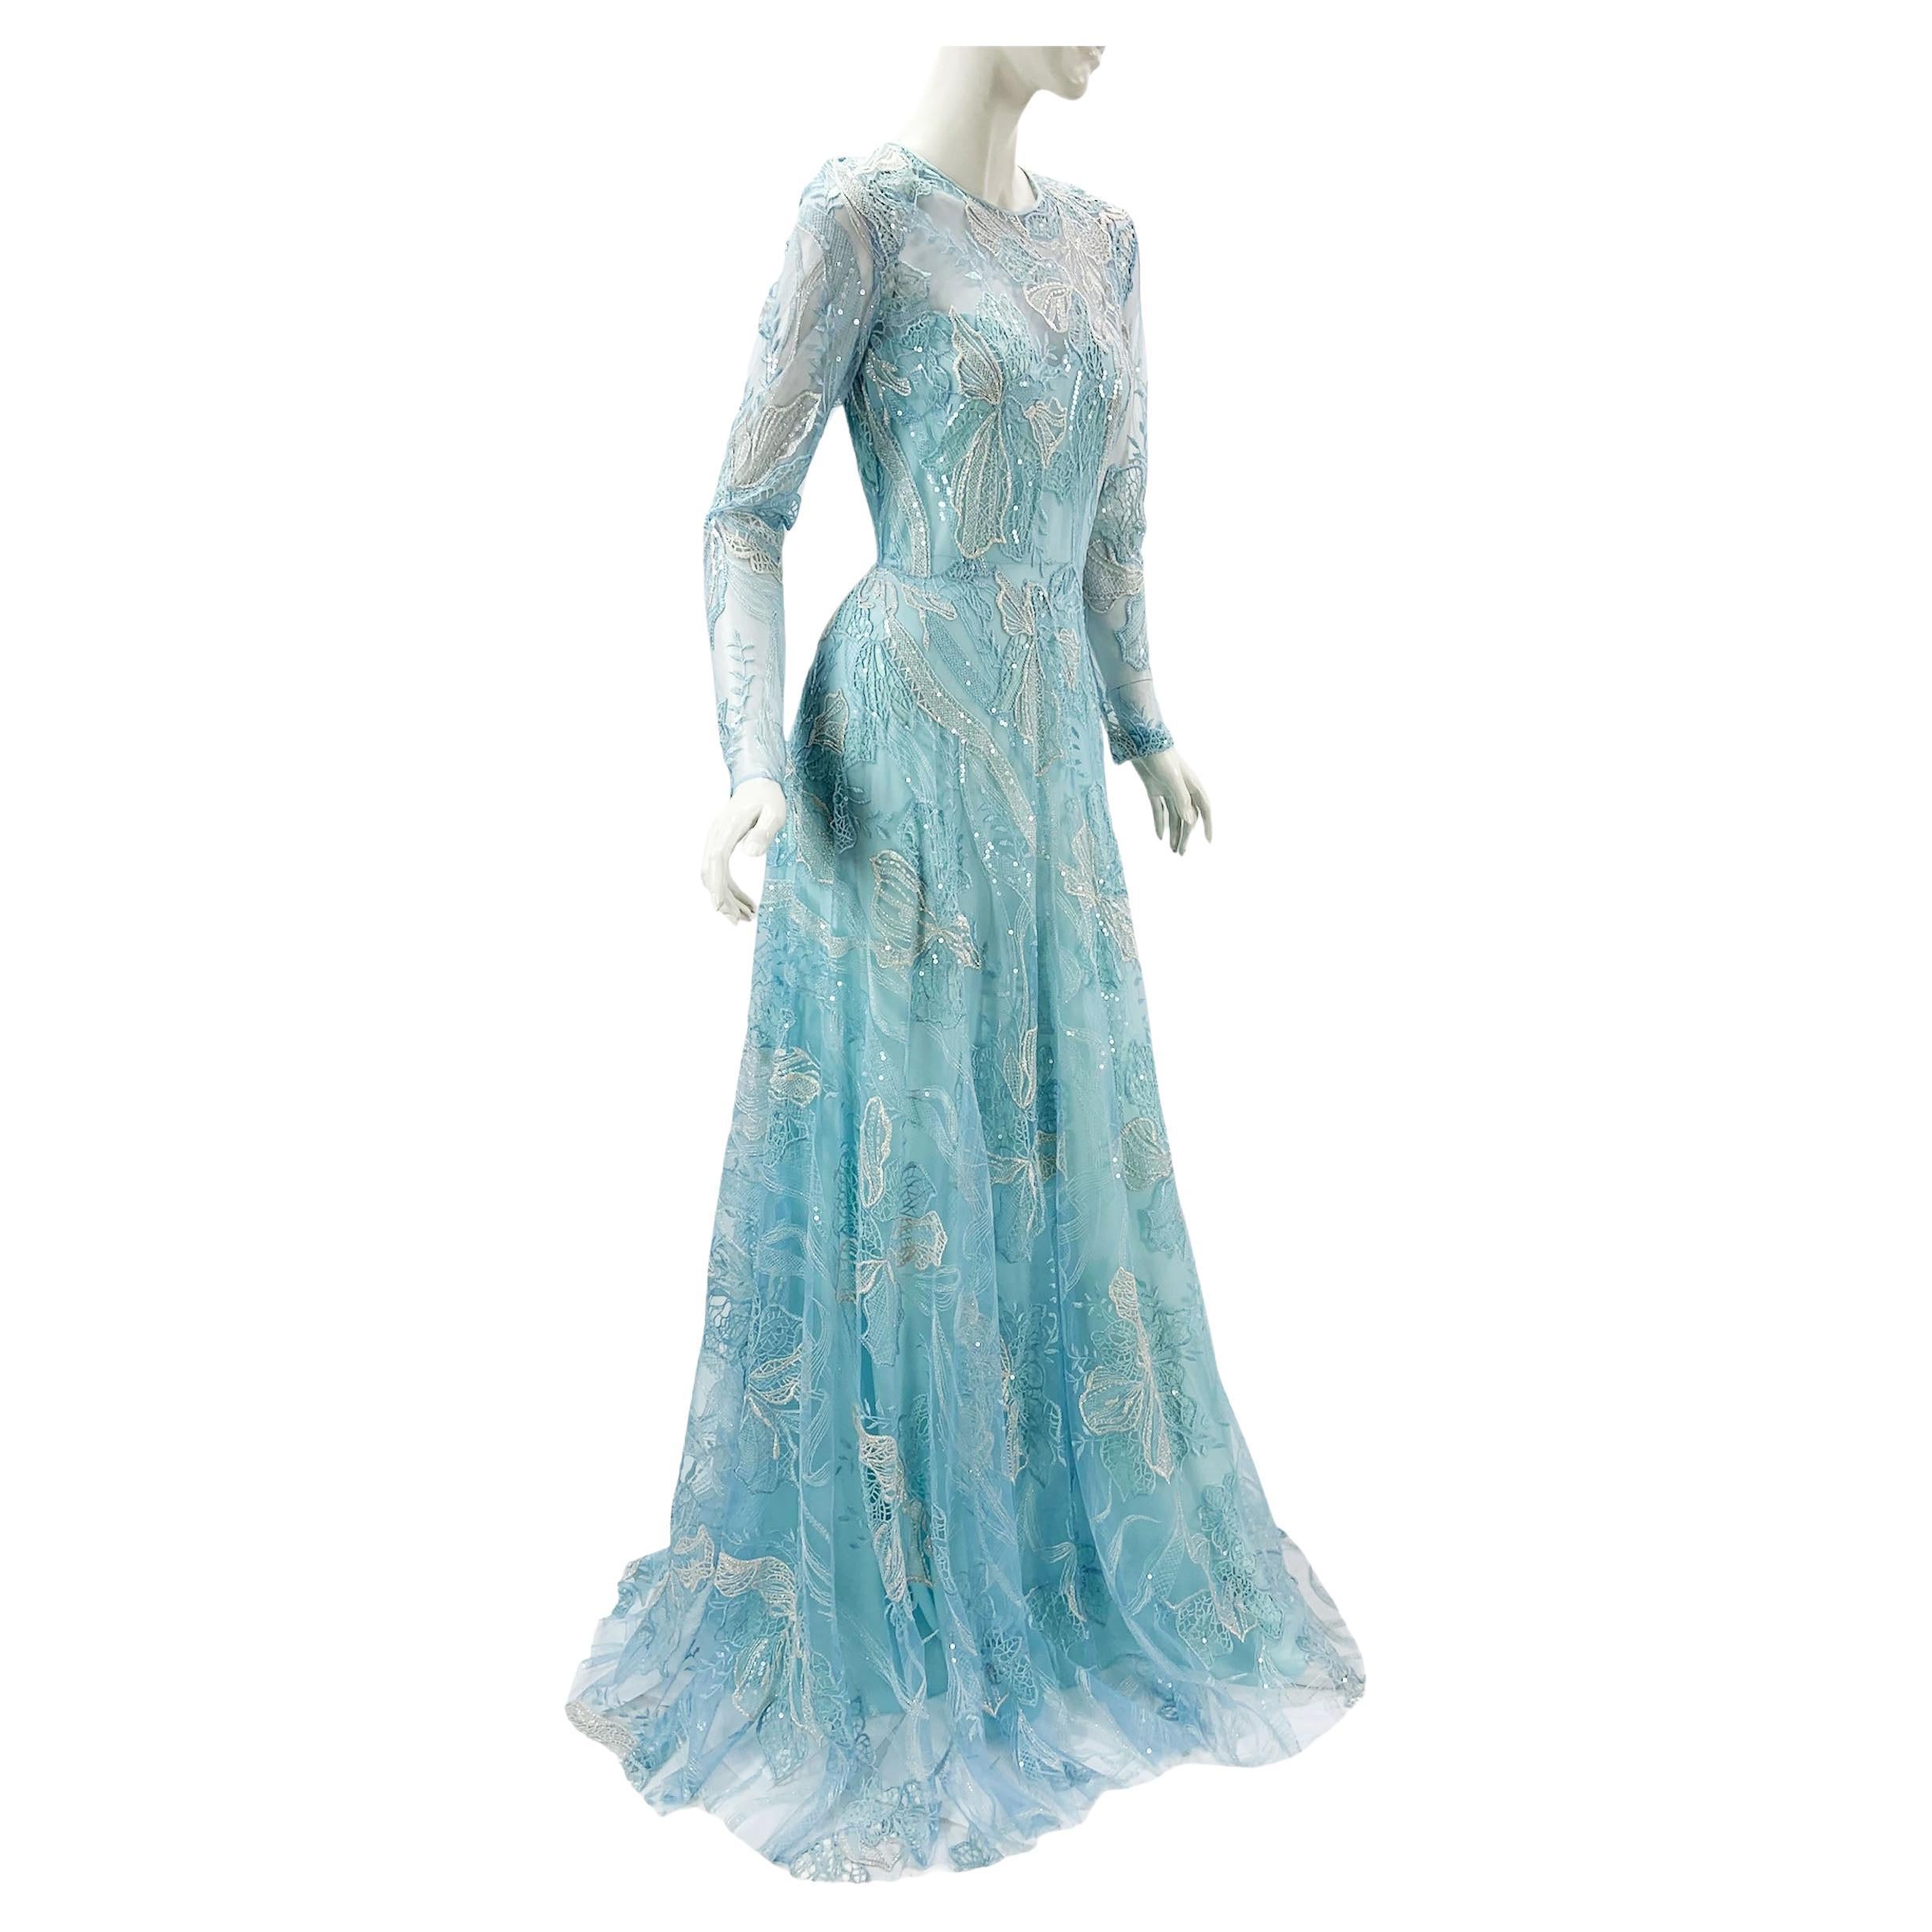 NWT Naeem Khan Blue Lace Embellished Tulle Maxi Dress Gown US 4 For Sale